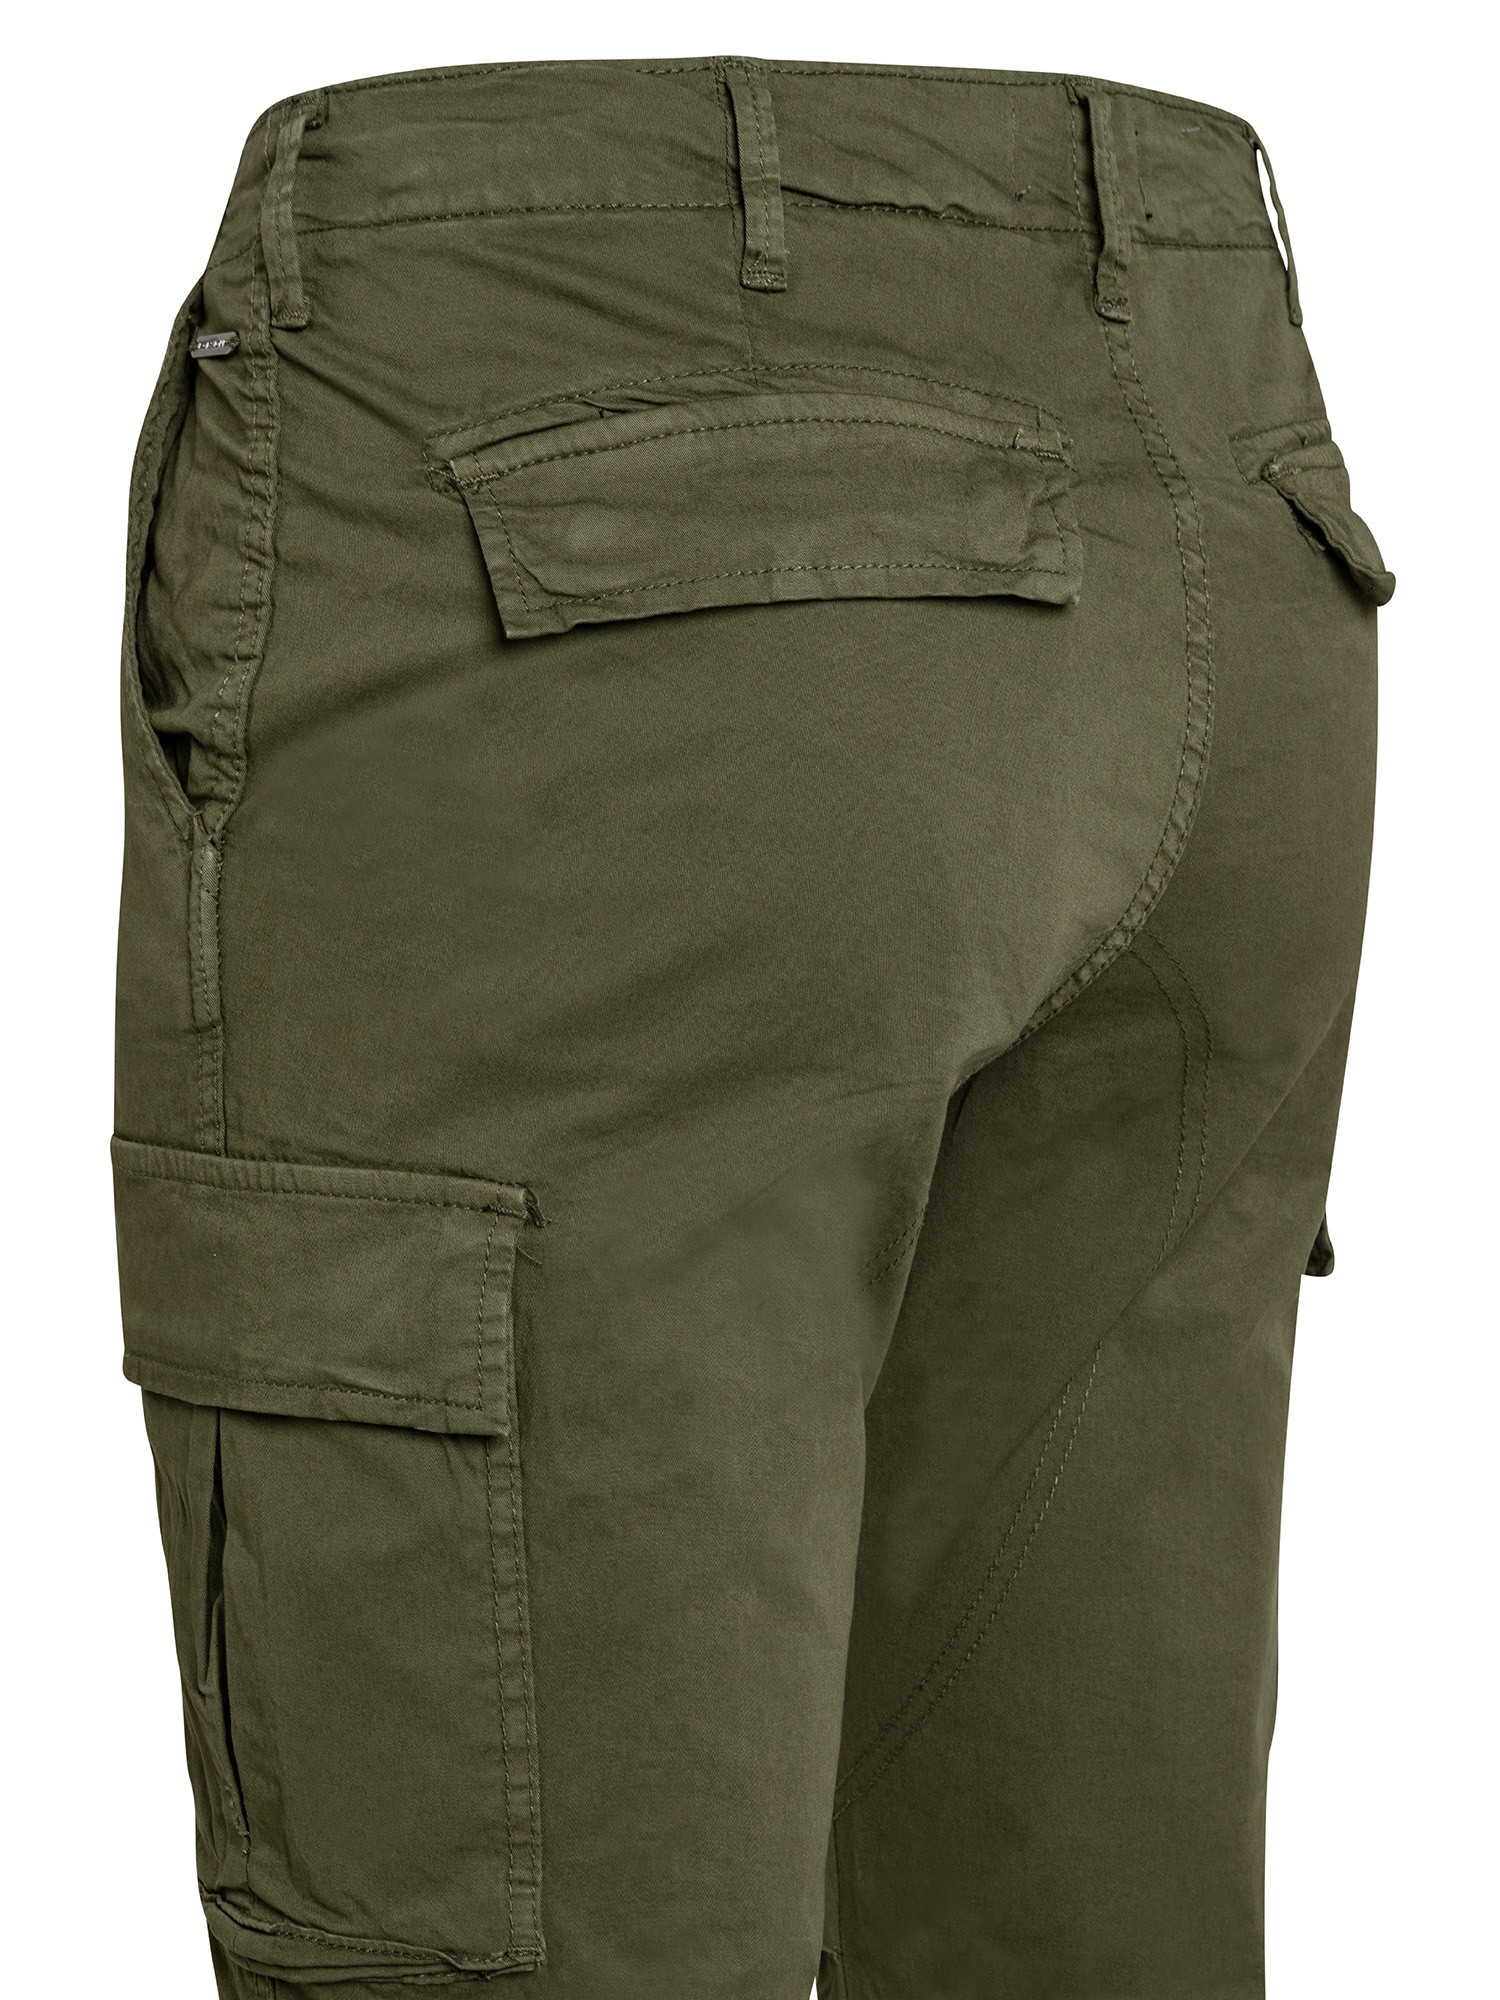 Pantaloni cargo con tasche laterali, Verde, large image number 2